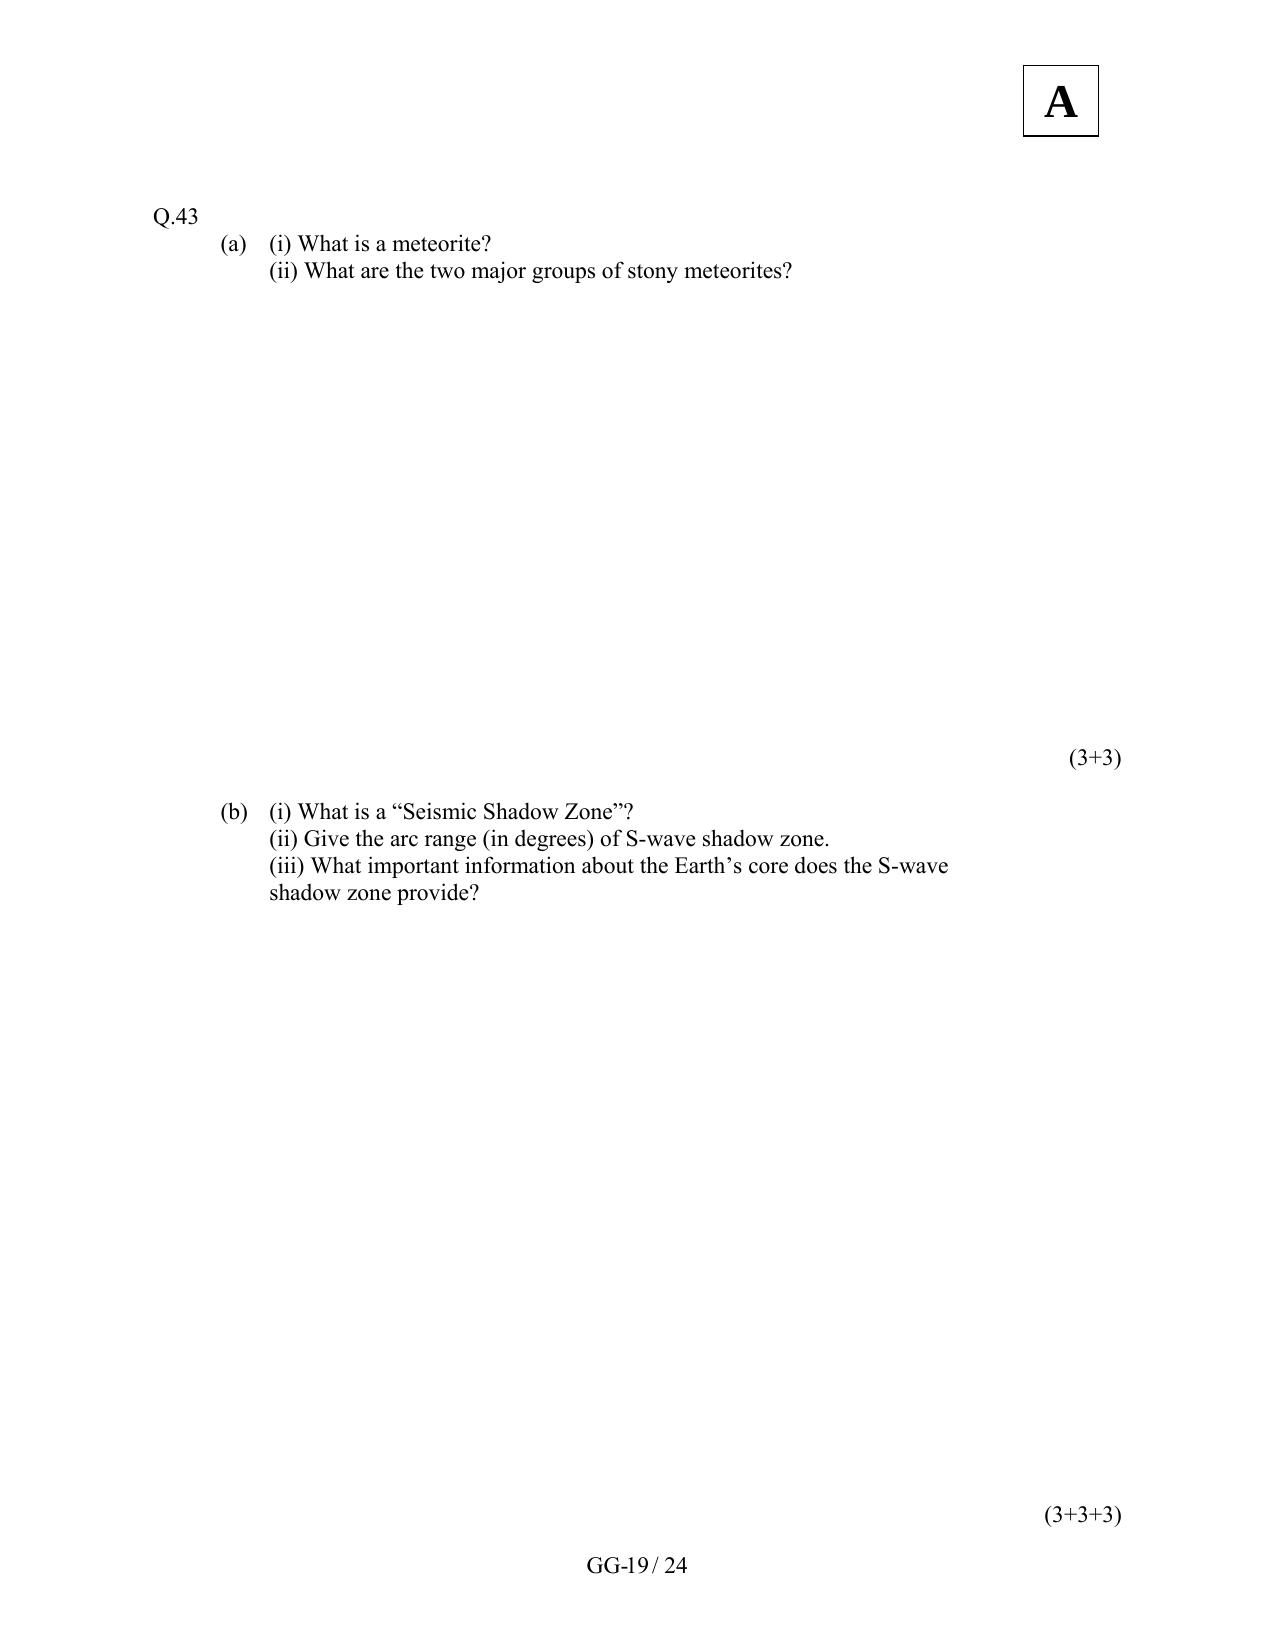 JAM 2012: GG Question Paper - Page 21